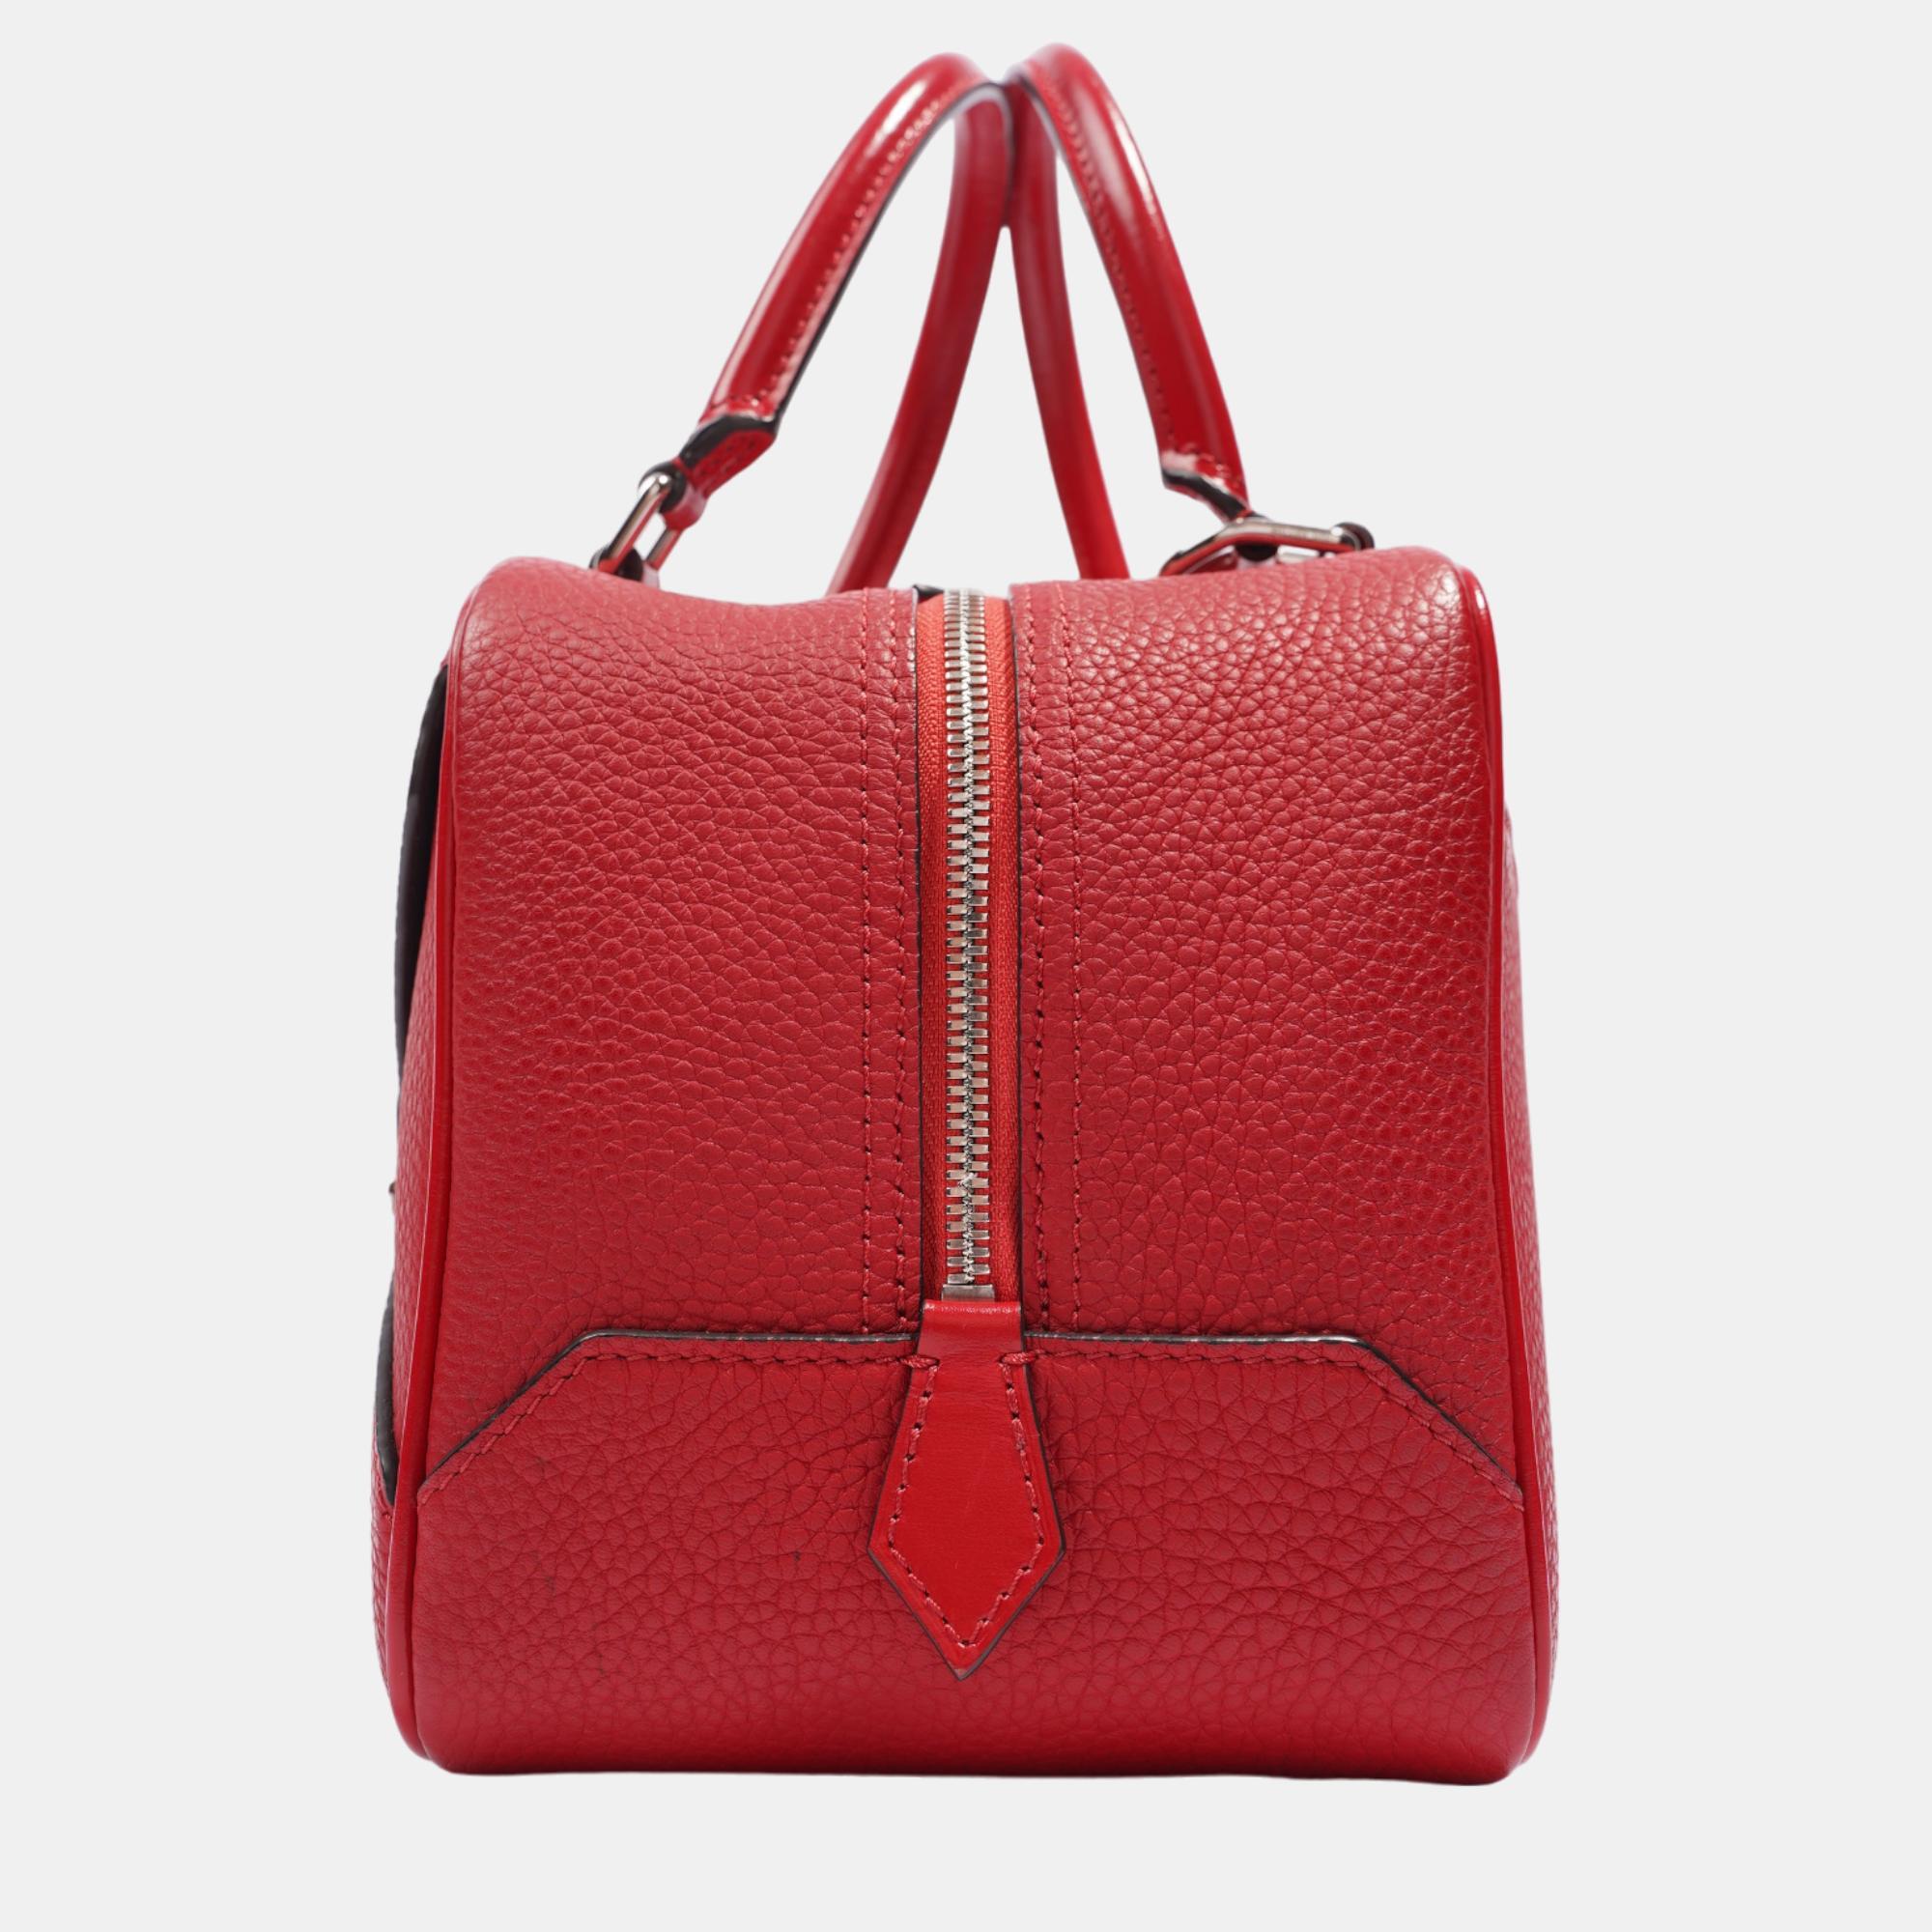 Louis Vuitton Neo Square Red Leather